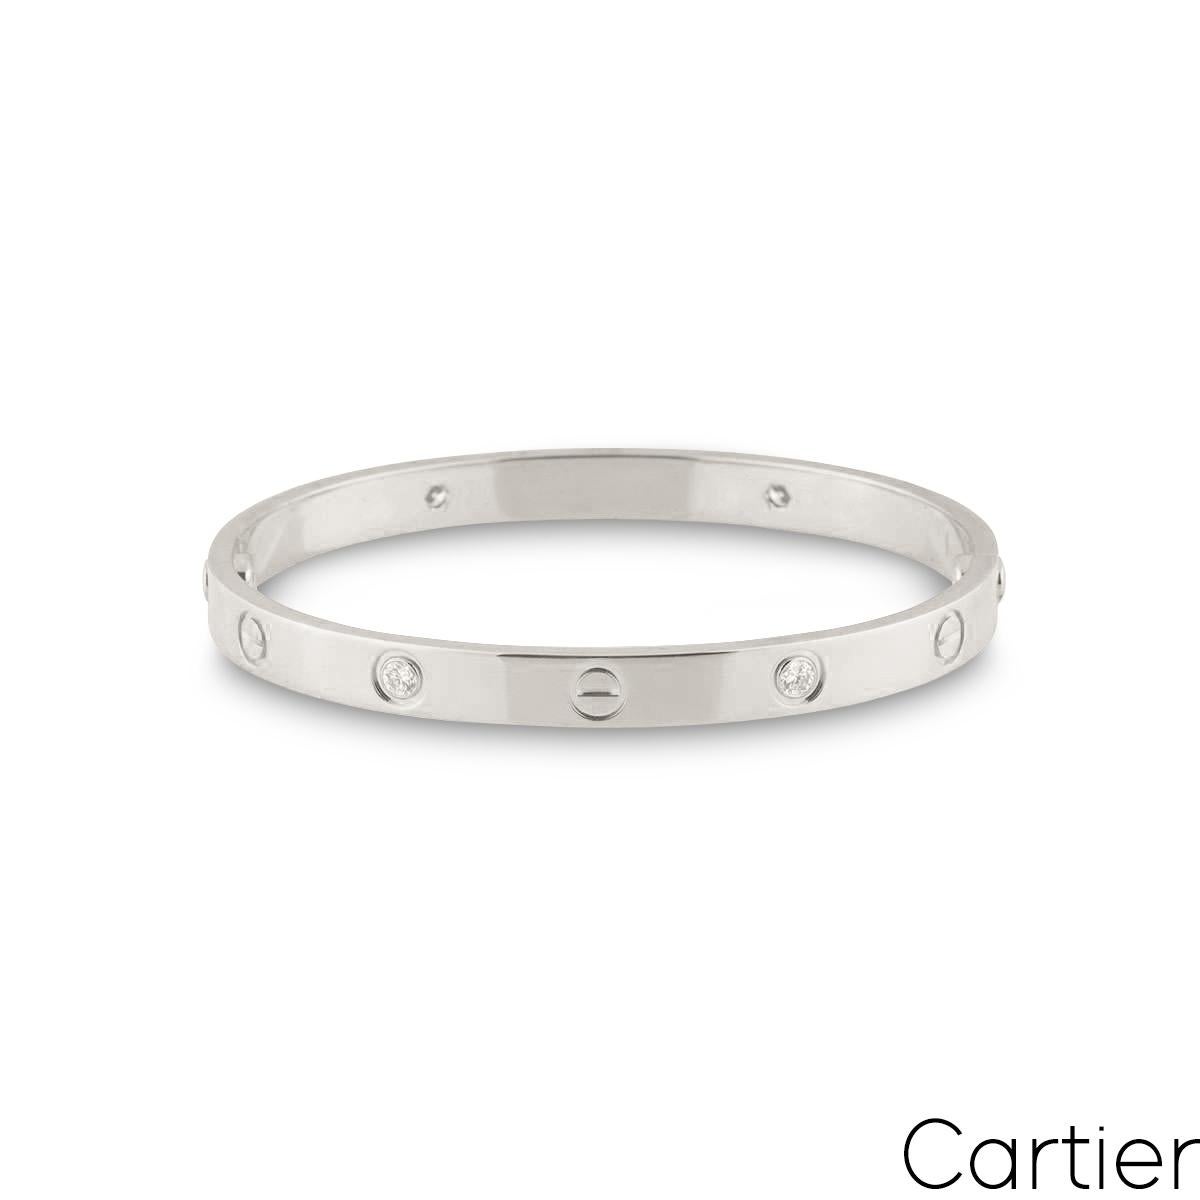 An 18k white gold Cartier diamond bracelet from the Love collection. The bracelet comprises of iconic screw motifs alternating with round brilliant cut diamonds. There are 4 round brilliant cut diamonds in a rubover setting. The bracelet is a size